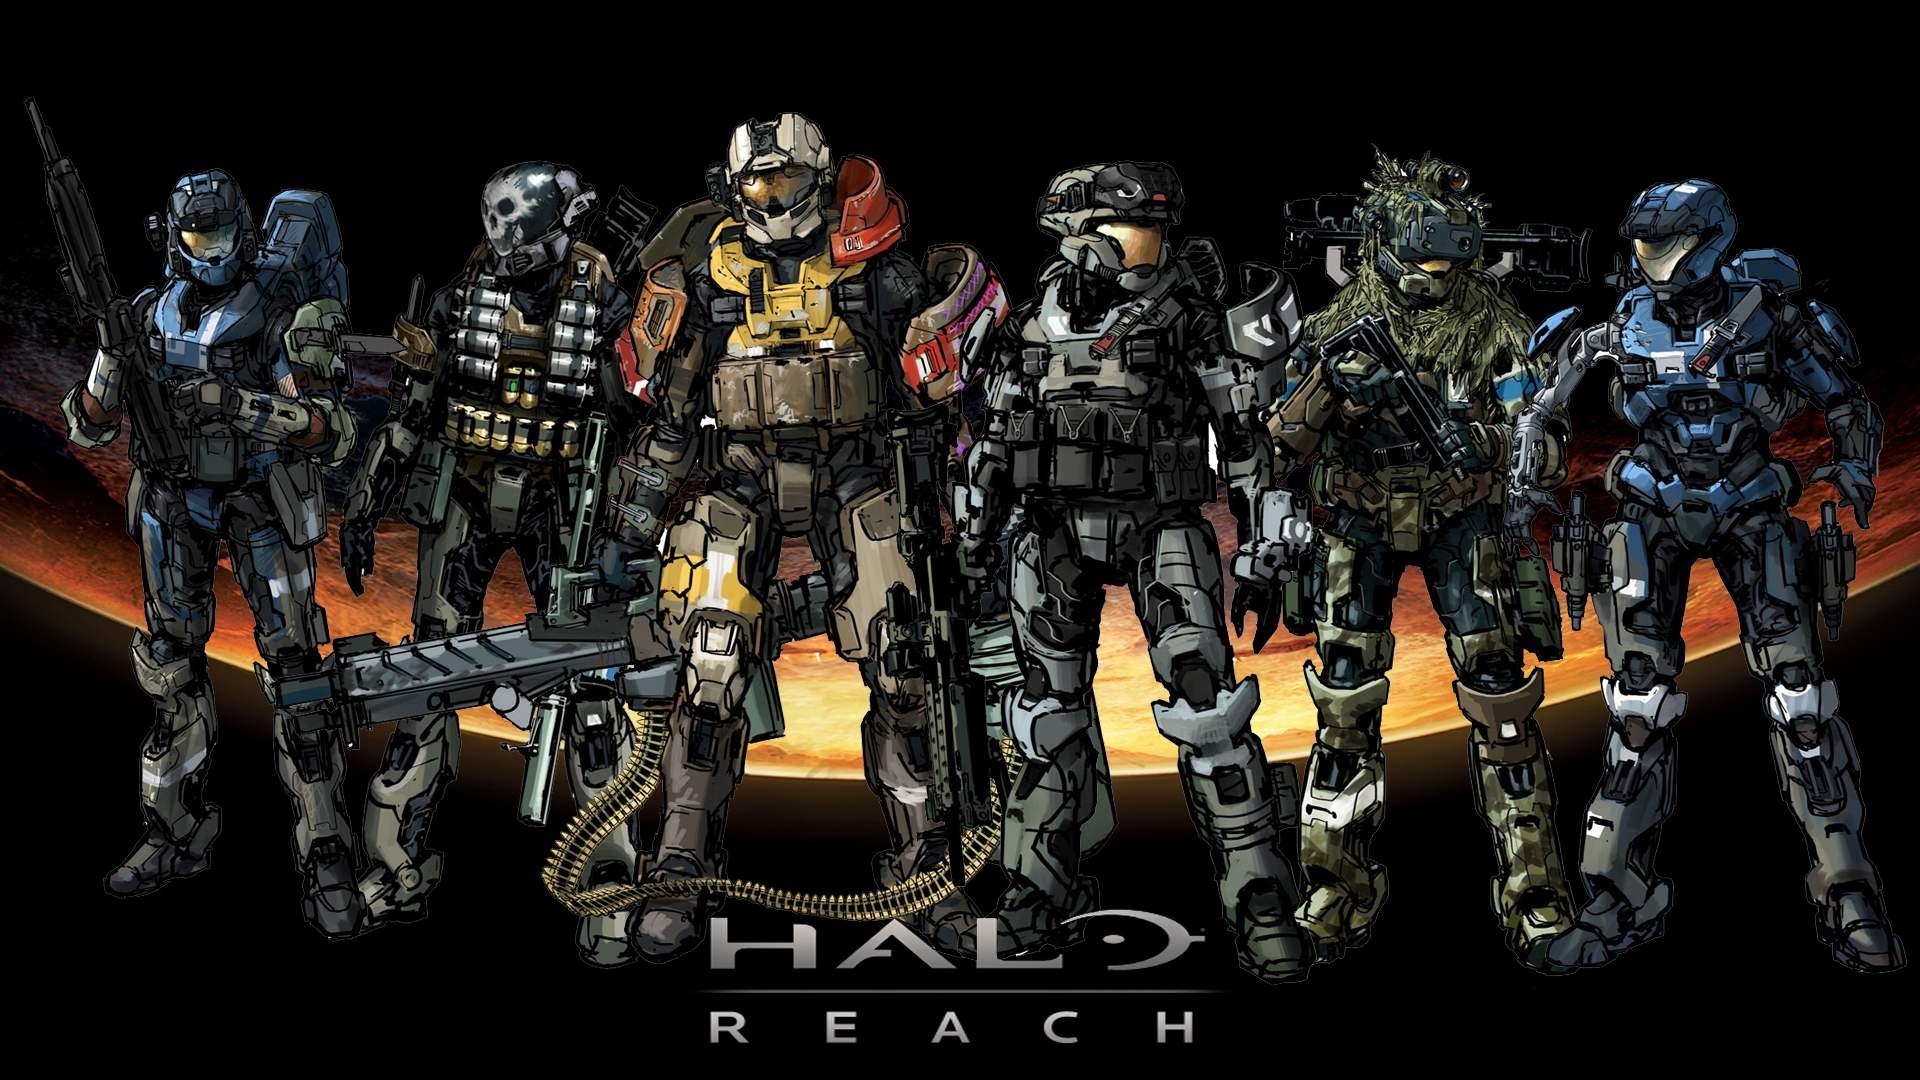 Halo: Reach gaming, Power of the Covenant, Reach Massacre, Humanity's last stand, 1920x1080 Full HD Desktop